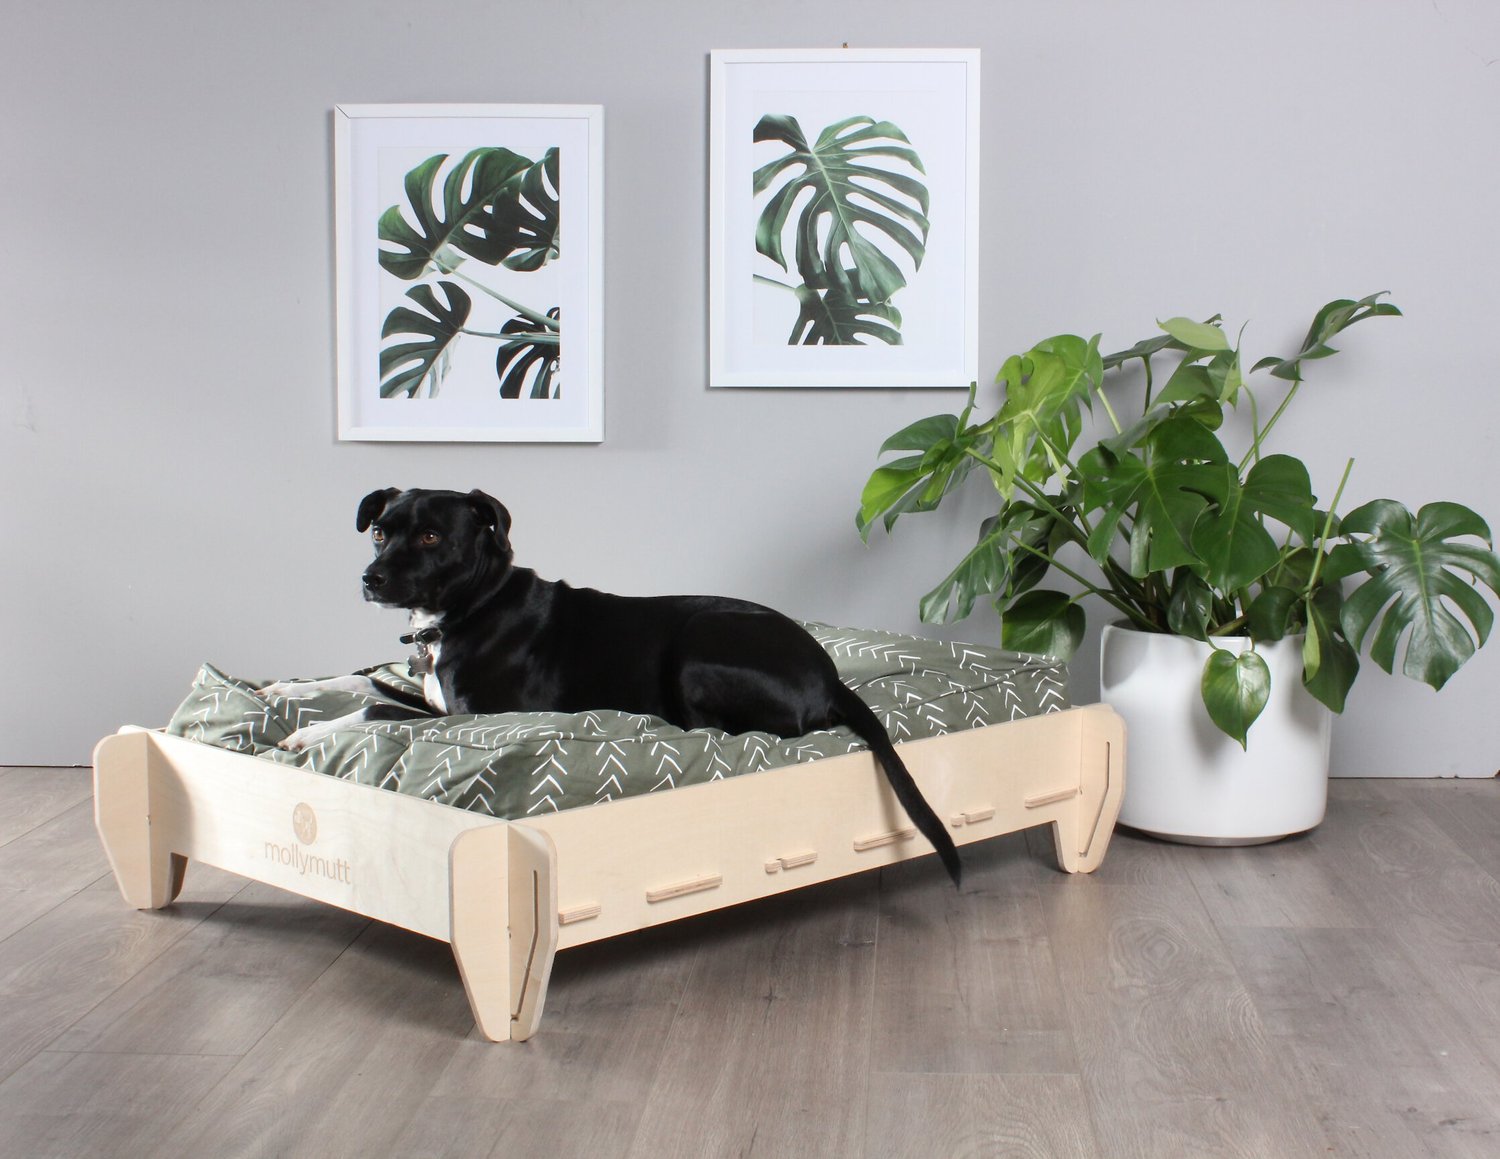 Molly Mutt Lift Elevated Dog Bed Frame, Dog Bed Bed Frame